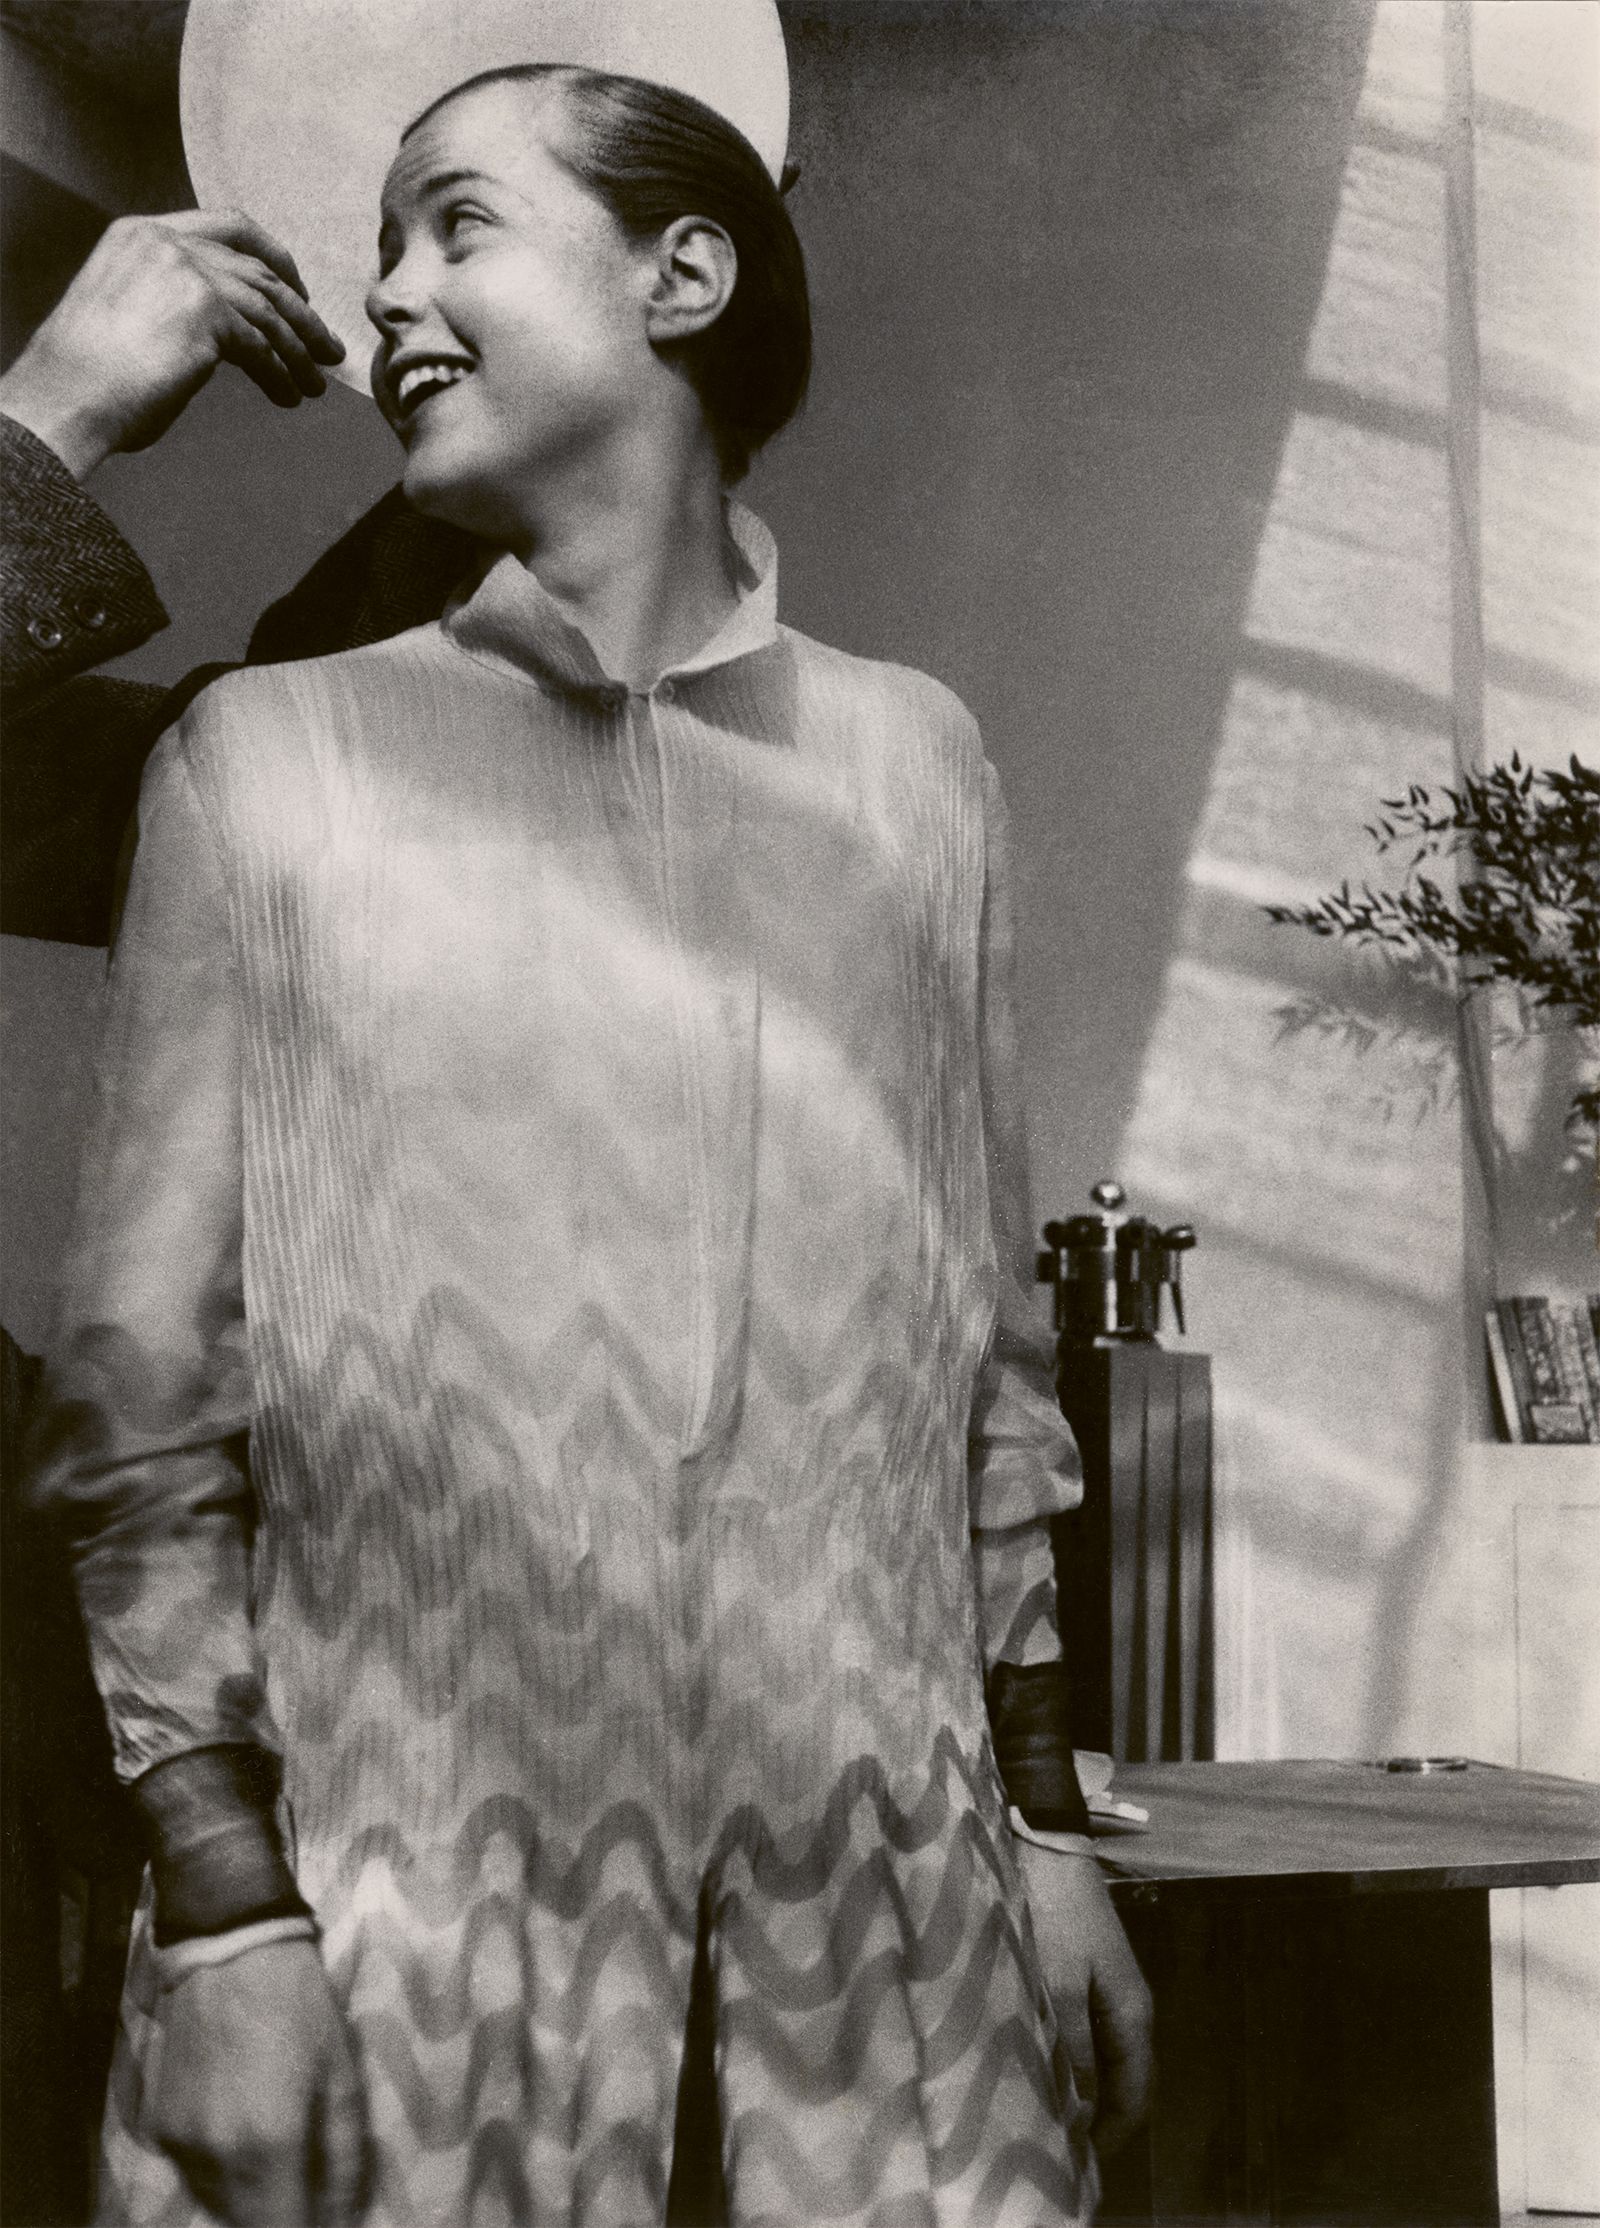 Charlotte Perriand: The little-known 20th century designer who